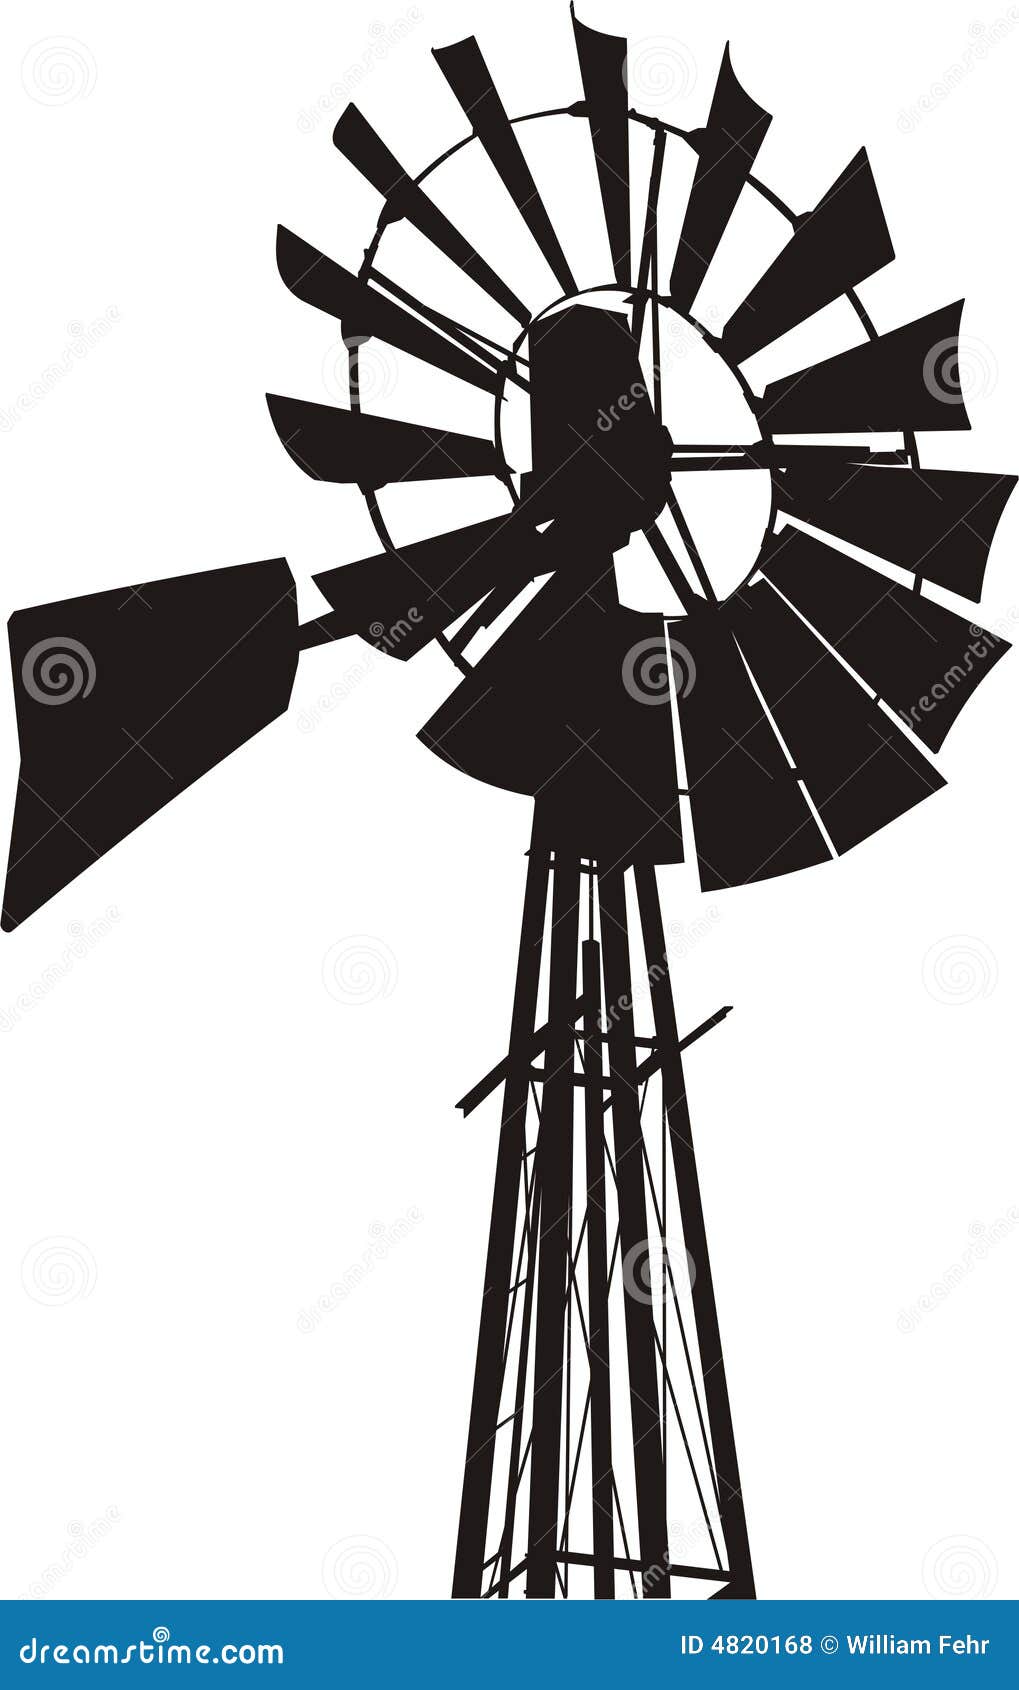 Silhouette of a water pumping windmill as might be seen on a farm.